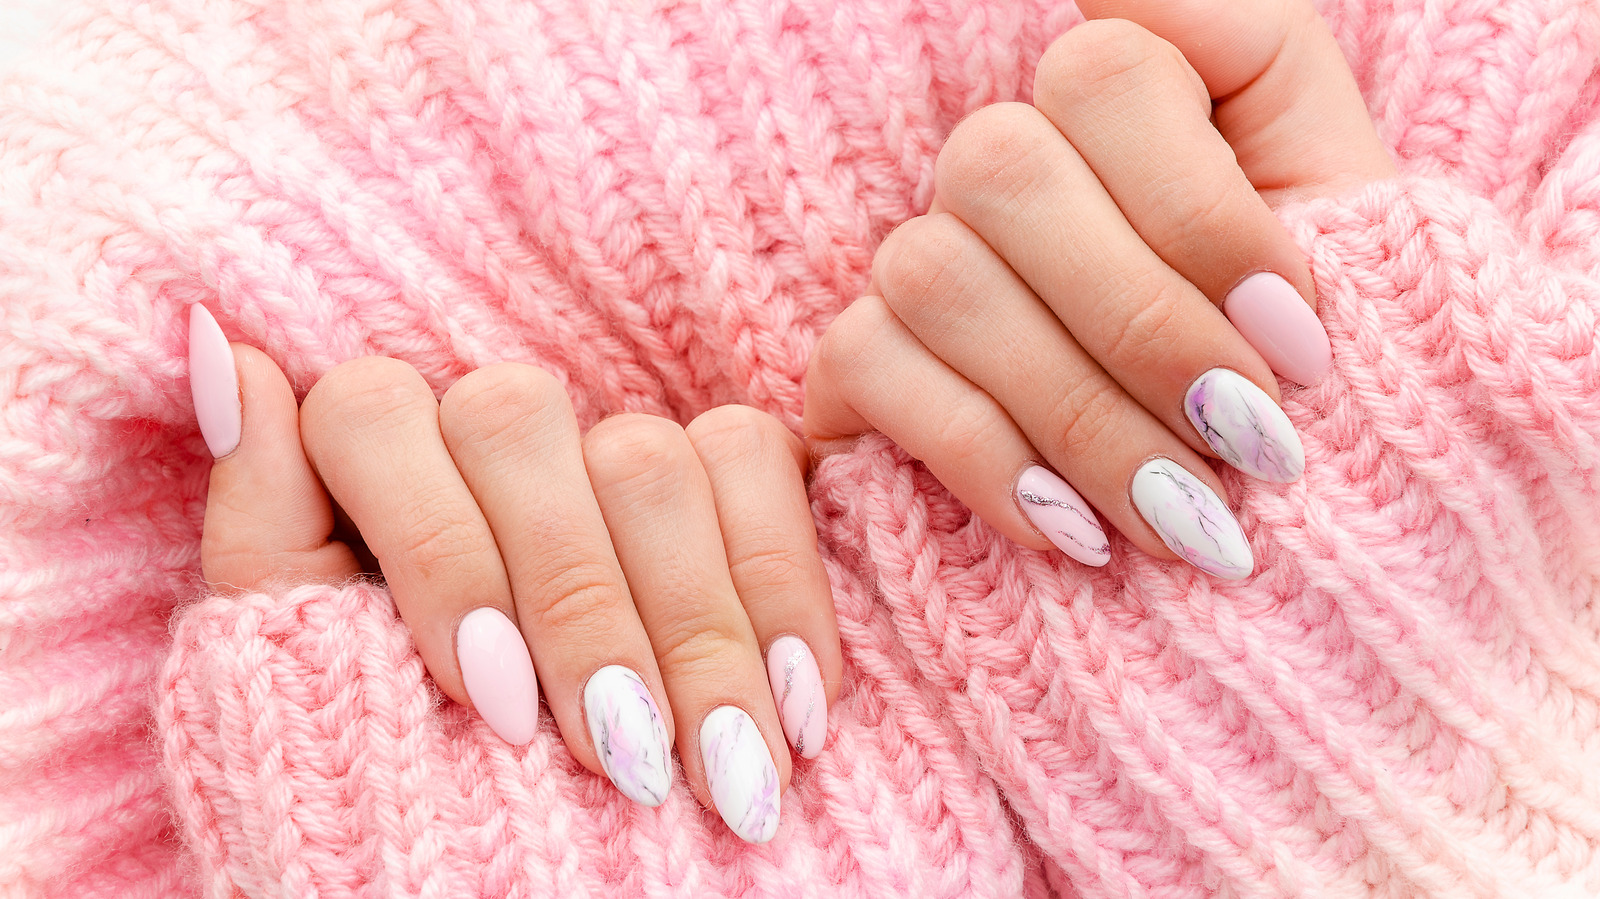 9. "Nail Colors That Will Make Your Hands Look More Youthful" - wide 7